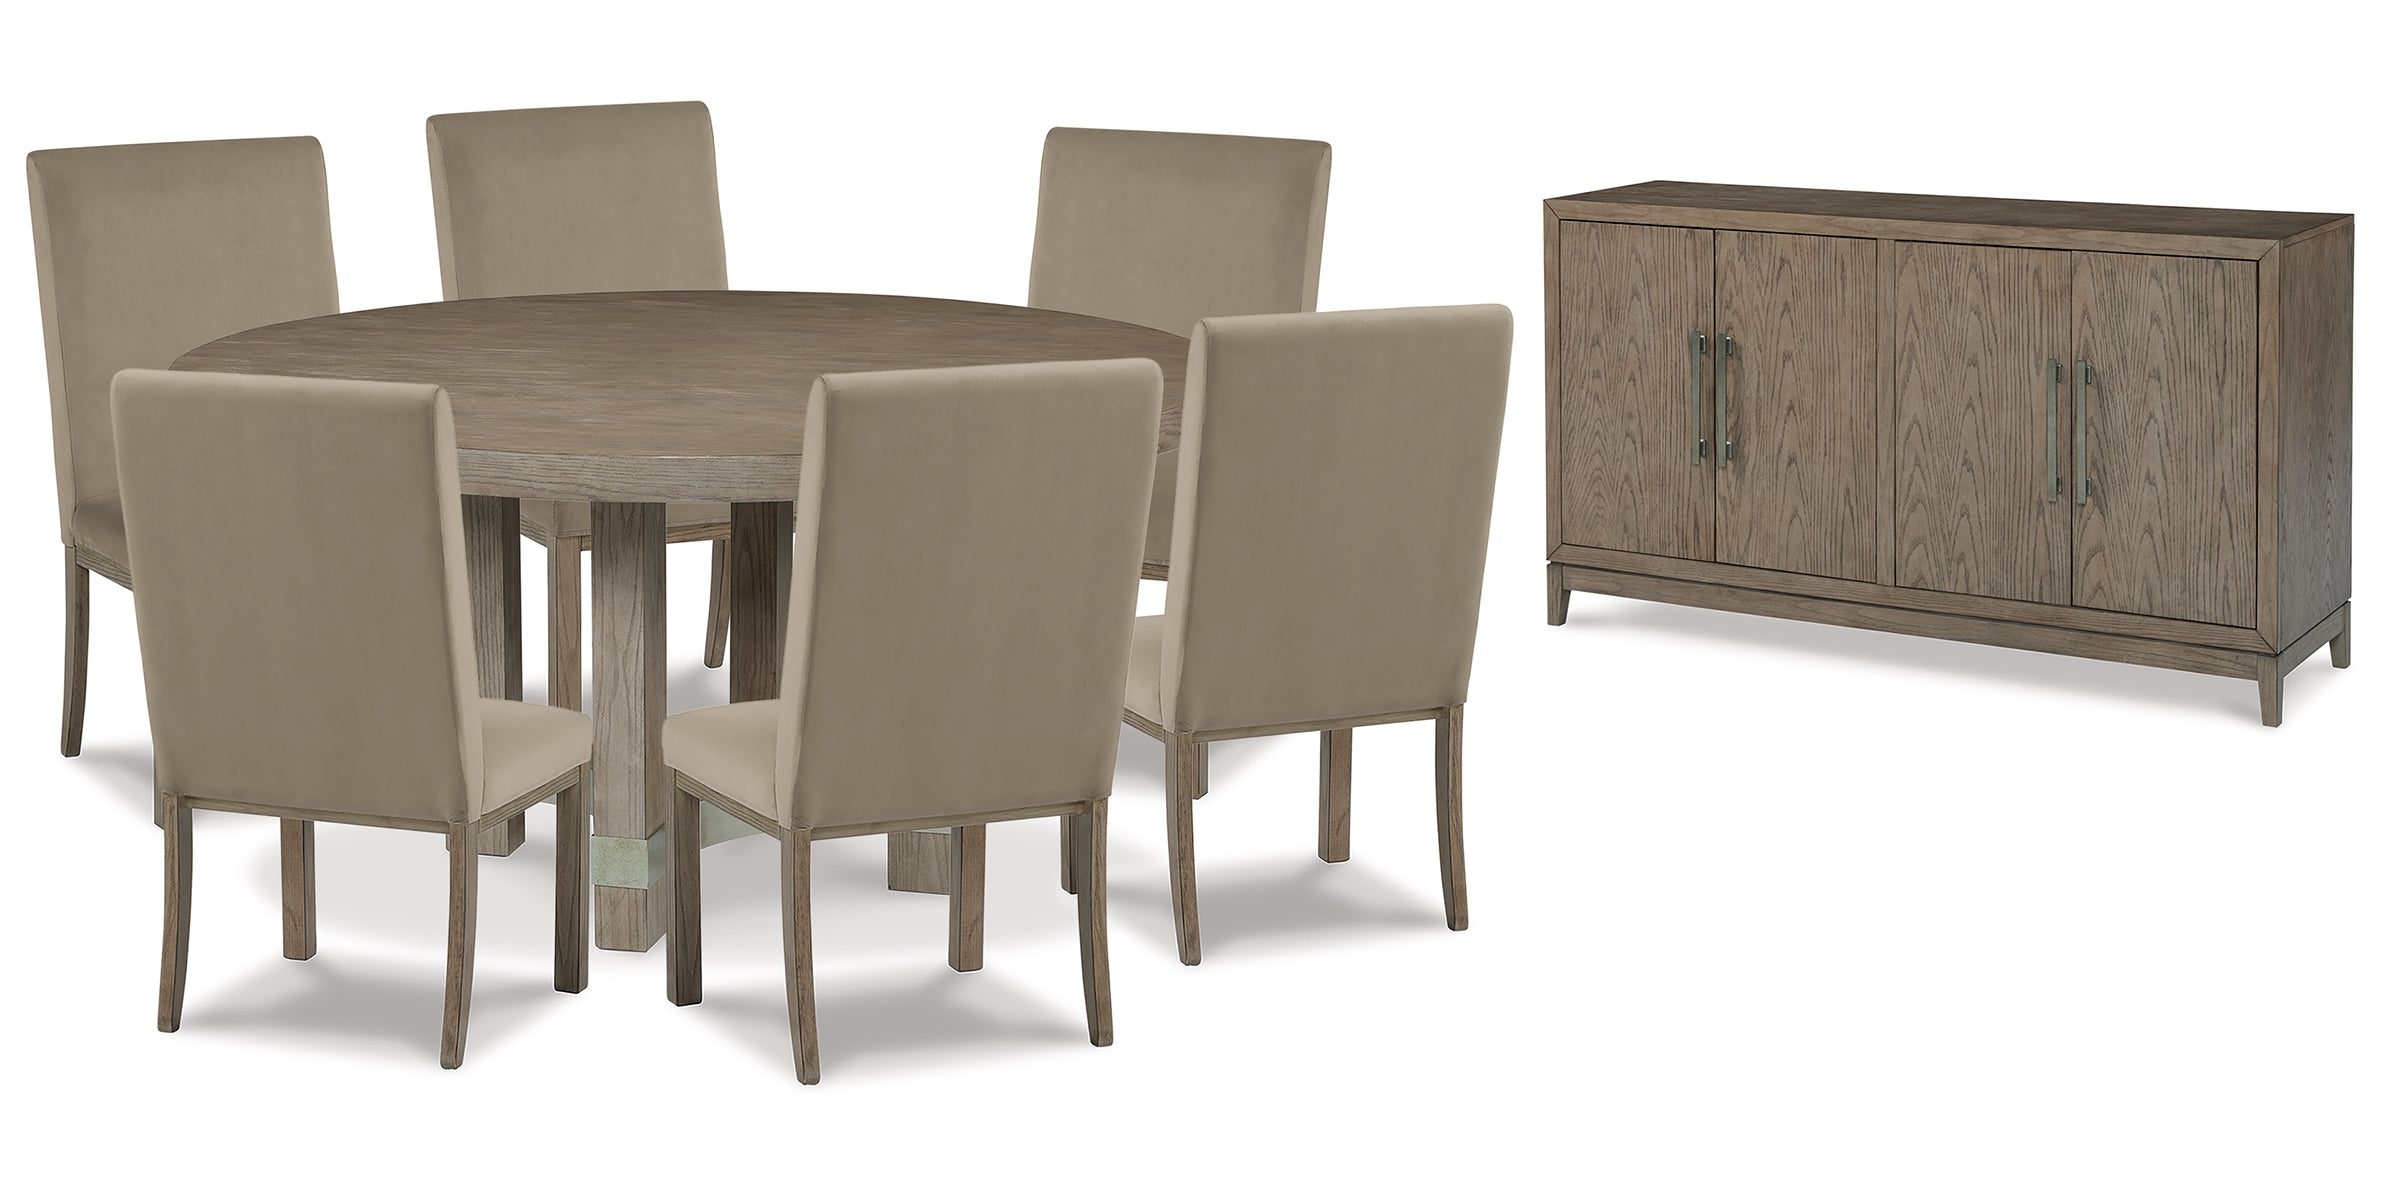 Chrestner Dining Table and 6 Chairs with Storage